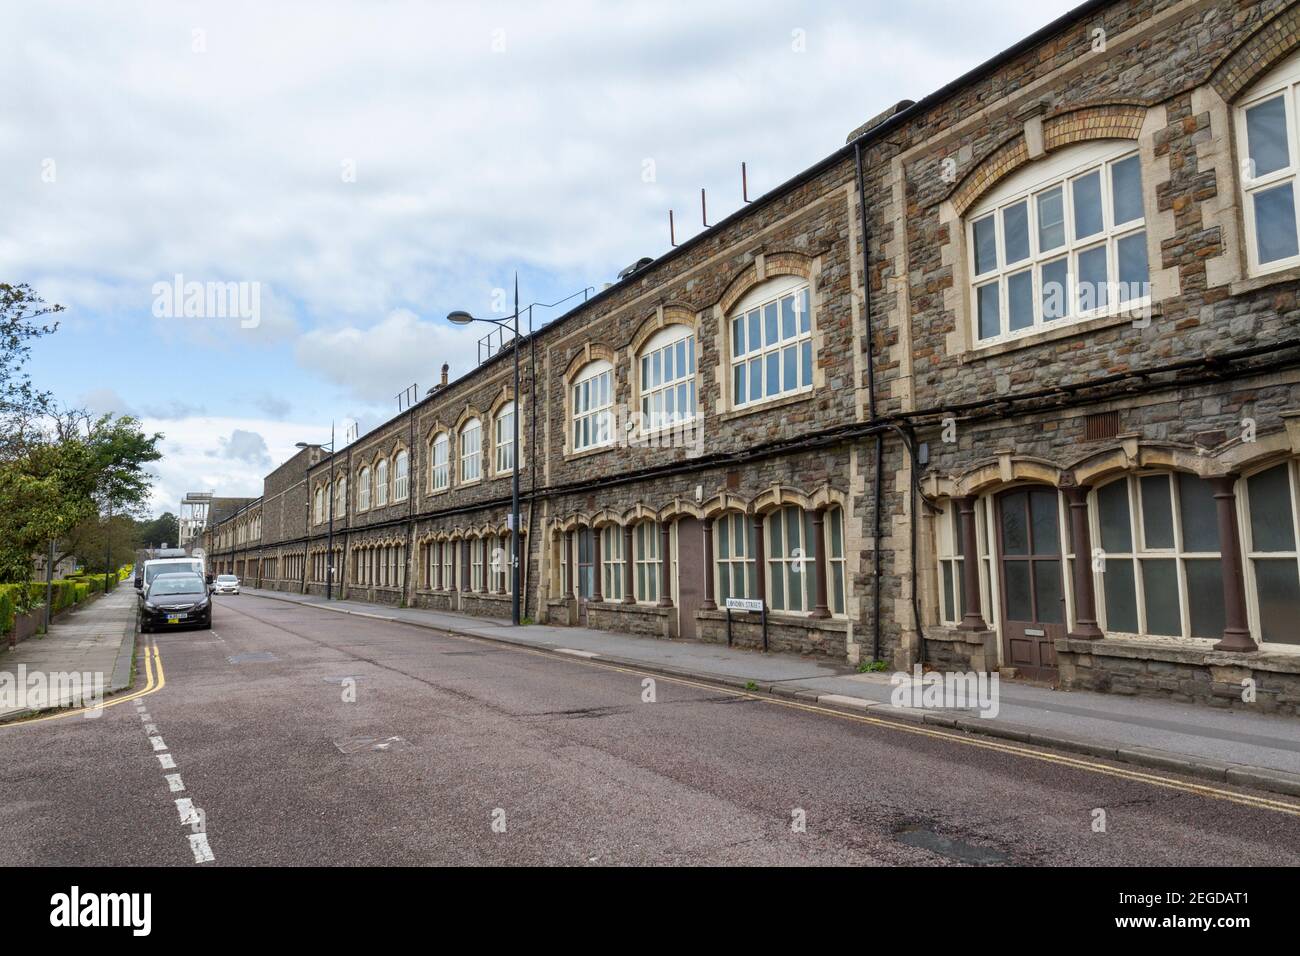 General view of the facade of the old GWR Carriage Works along London Street in Railway Village, Swindon, Wiltshire, UK. Stock Photo